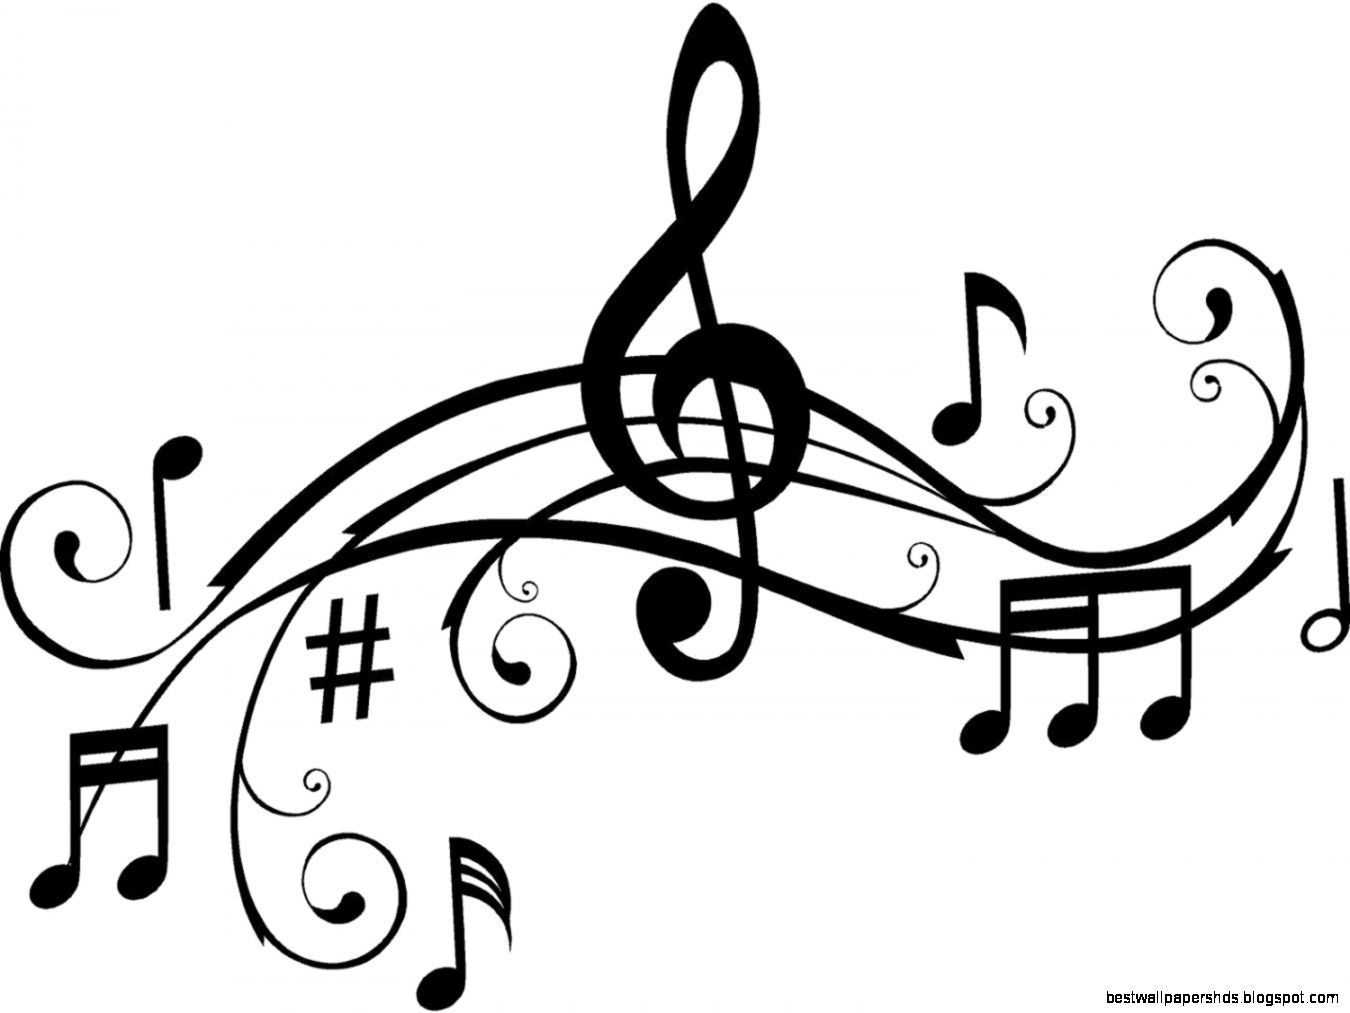 The Best Step By Step Guide To Create Awesome Music Clip Art.